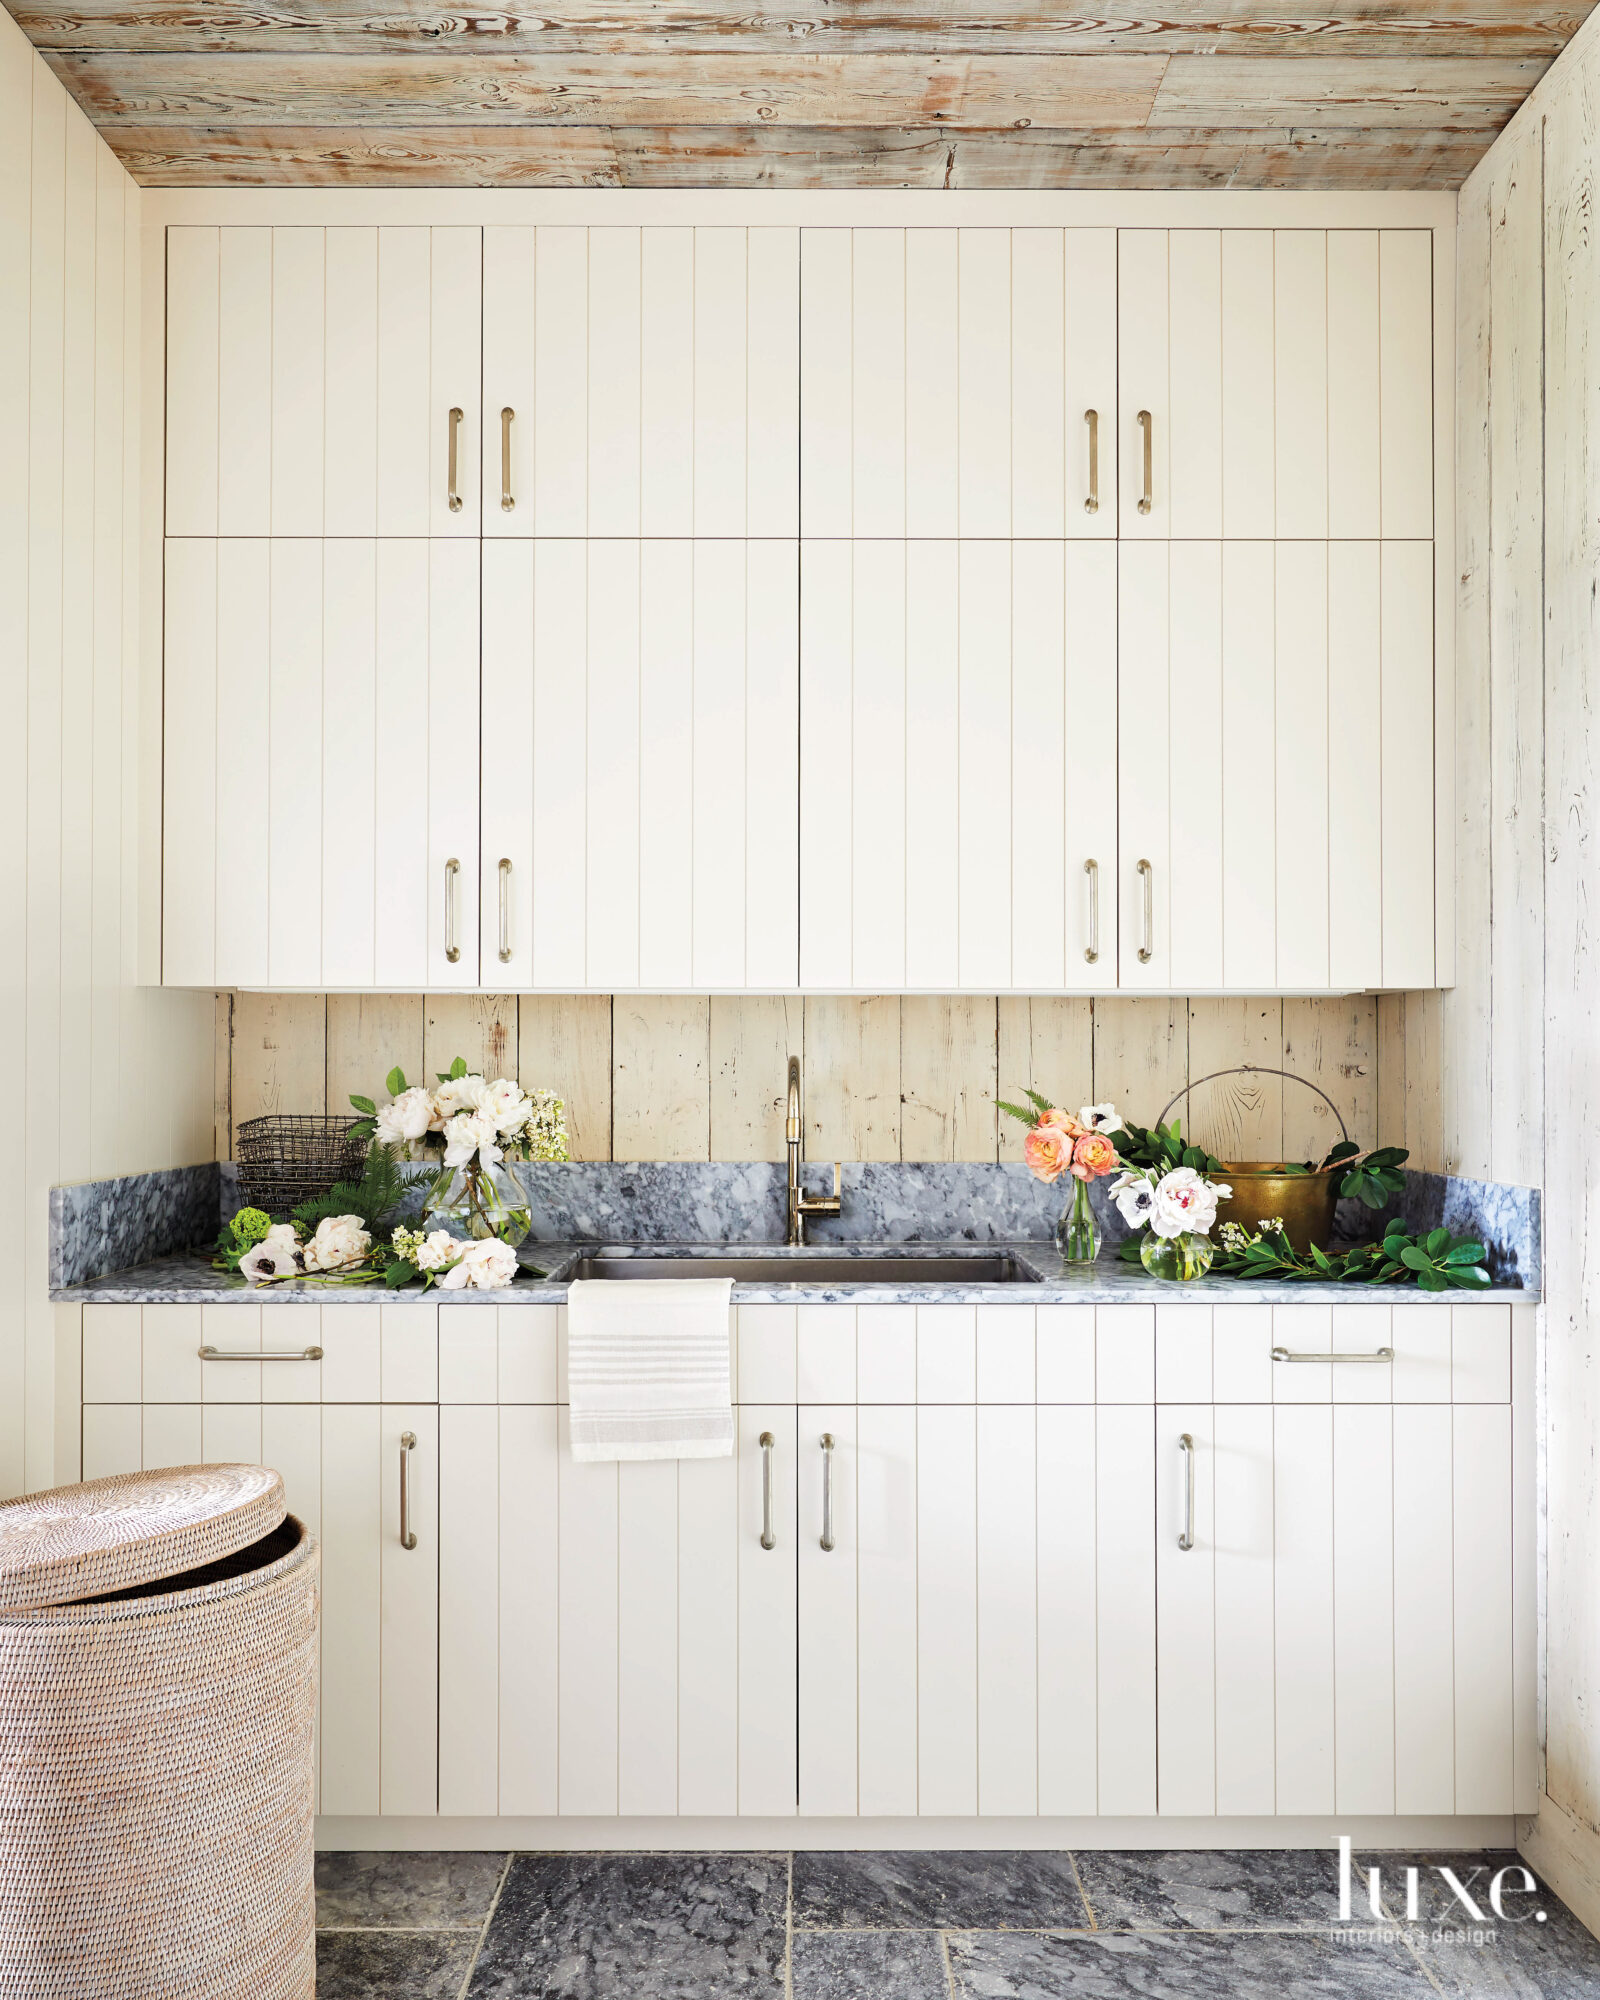 White cabinetry and a unique backsplash behind the kitchen sink